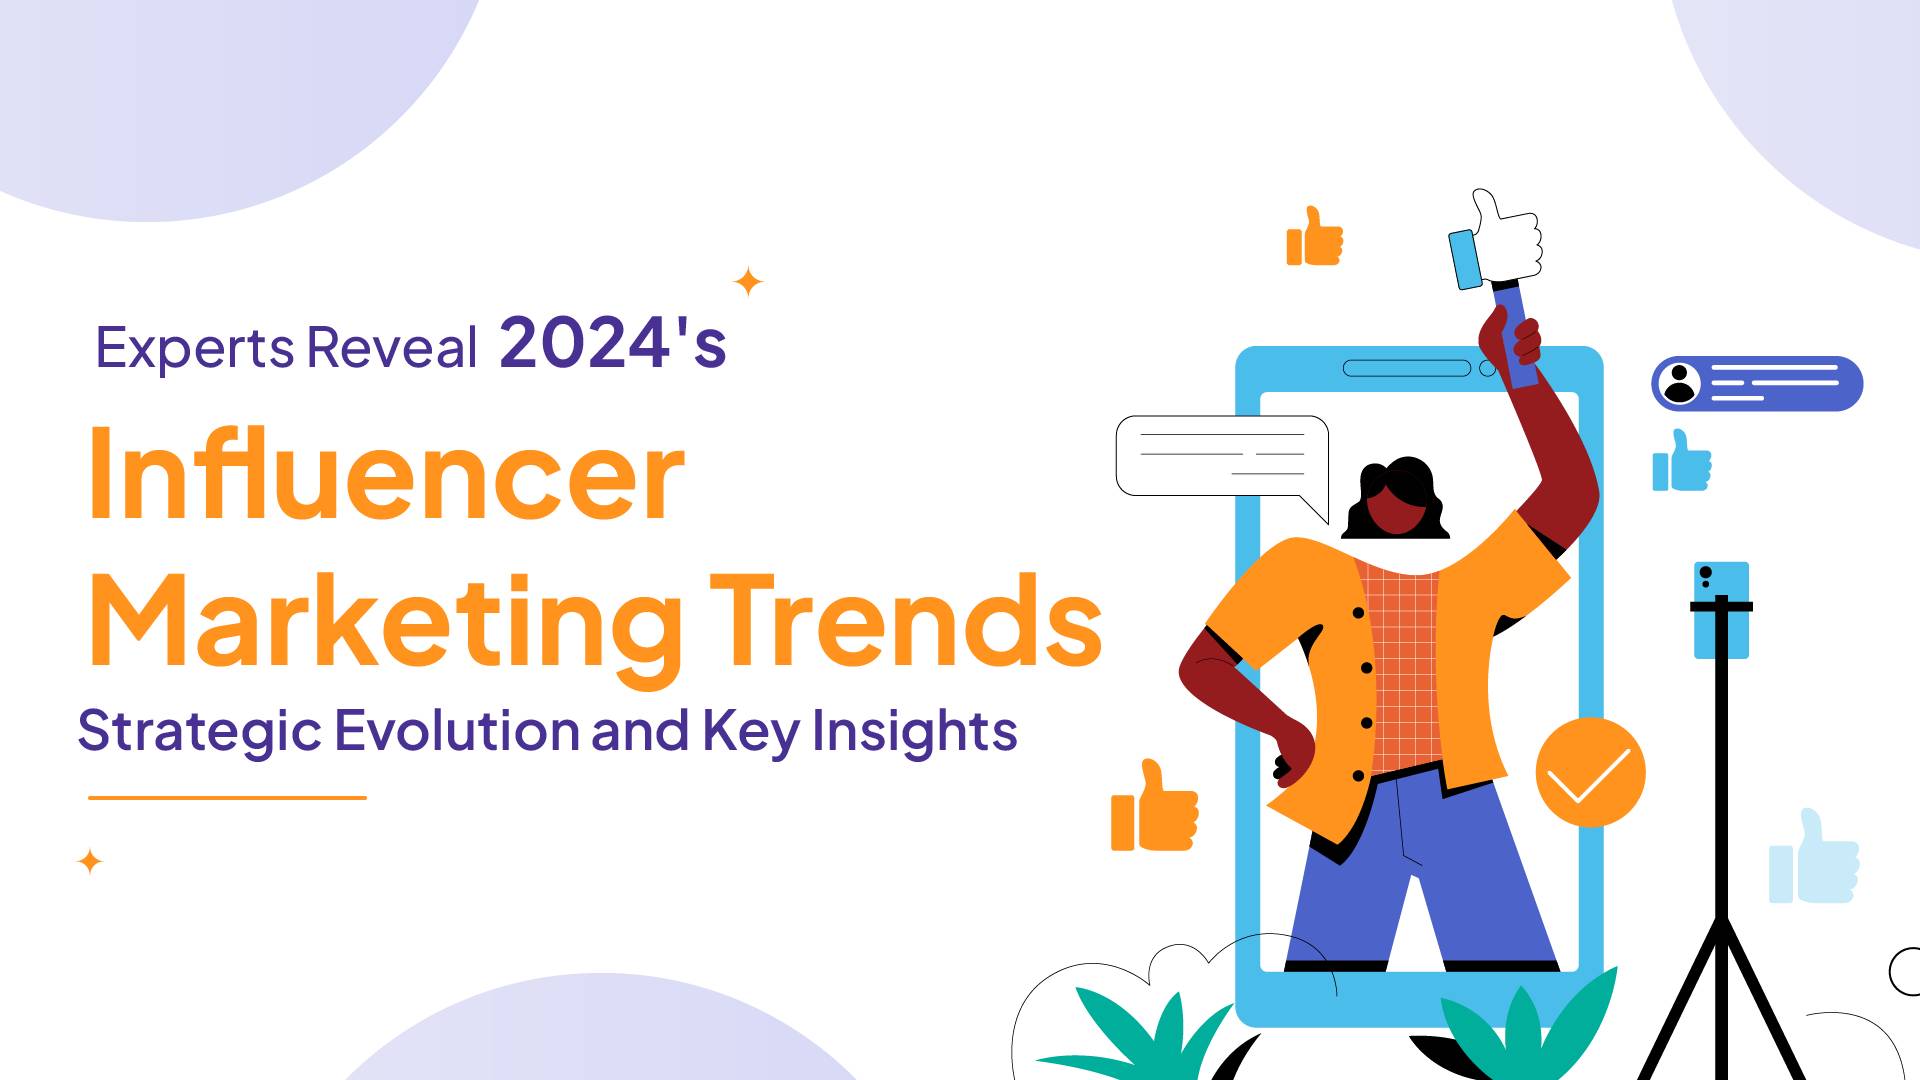 Experts Reveal 2024's Influencer Marketing Trends: Strategic Evolution and Key Insights